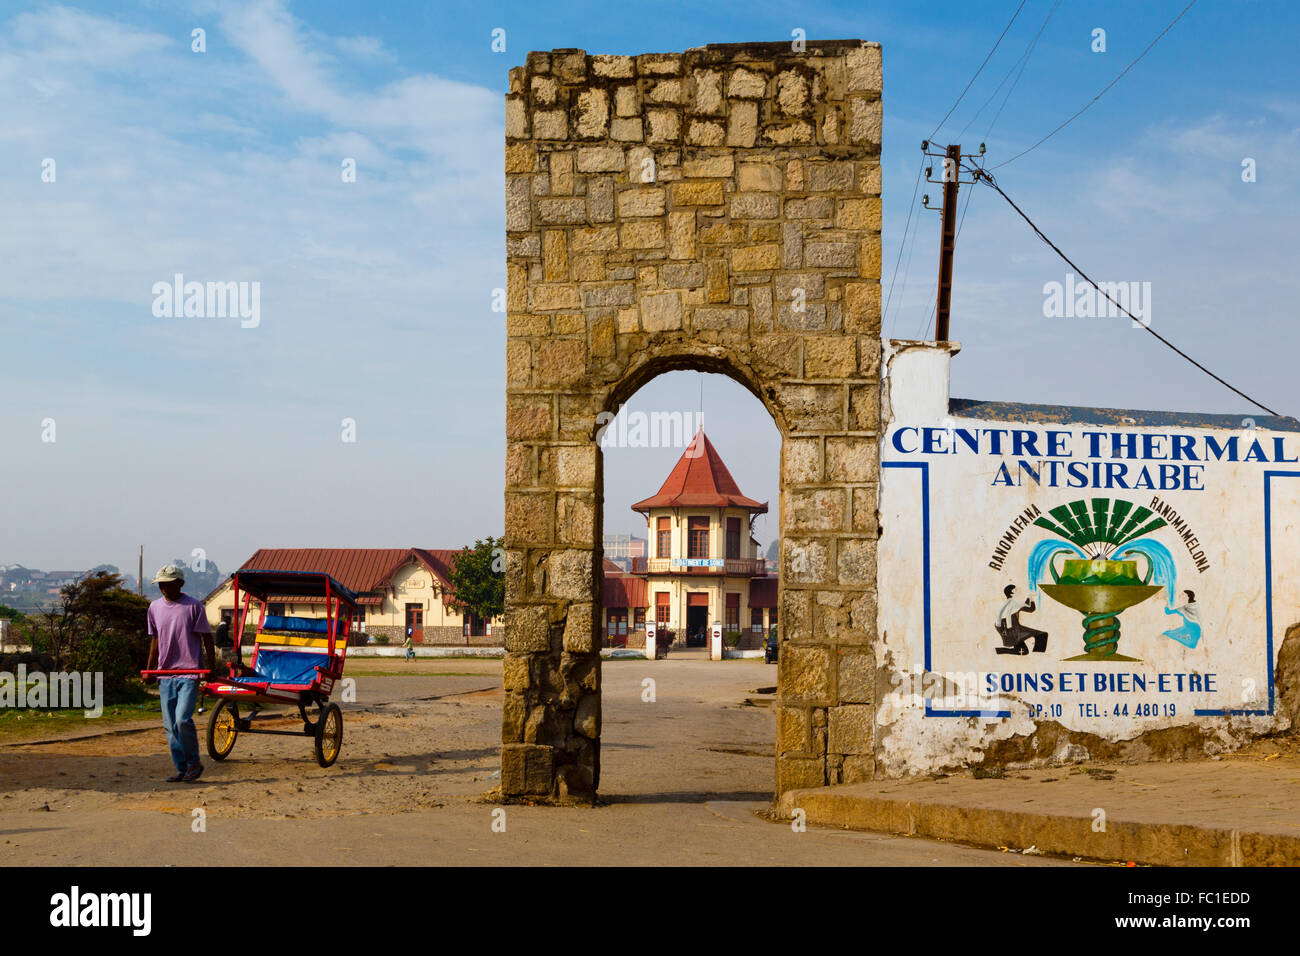 National 7, Antsirabe,the thermal spa building,Madagascar Stock Photo